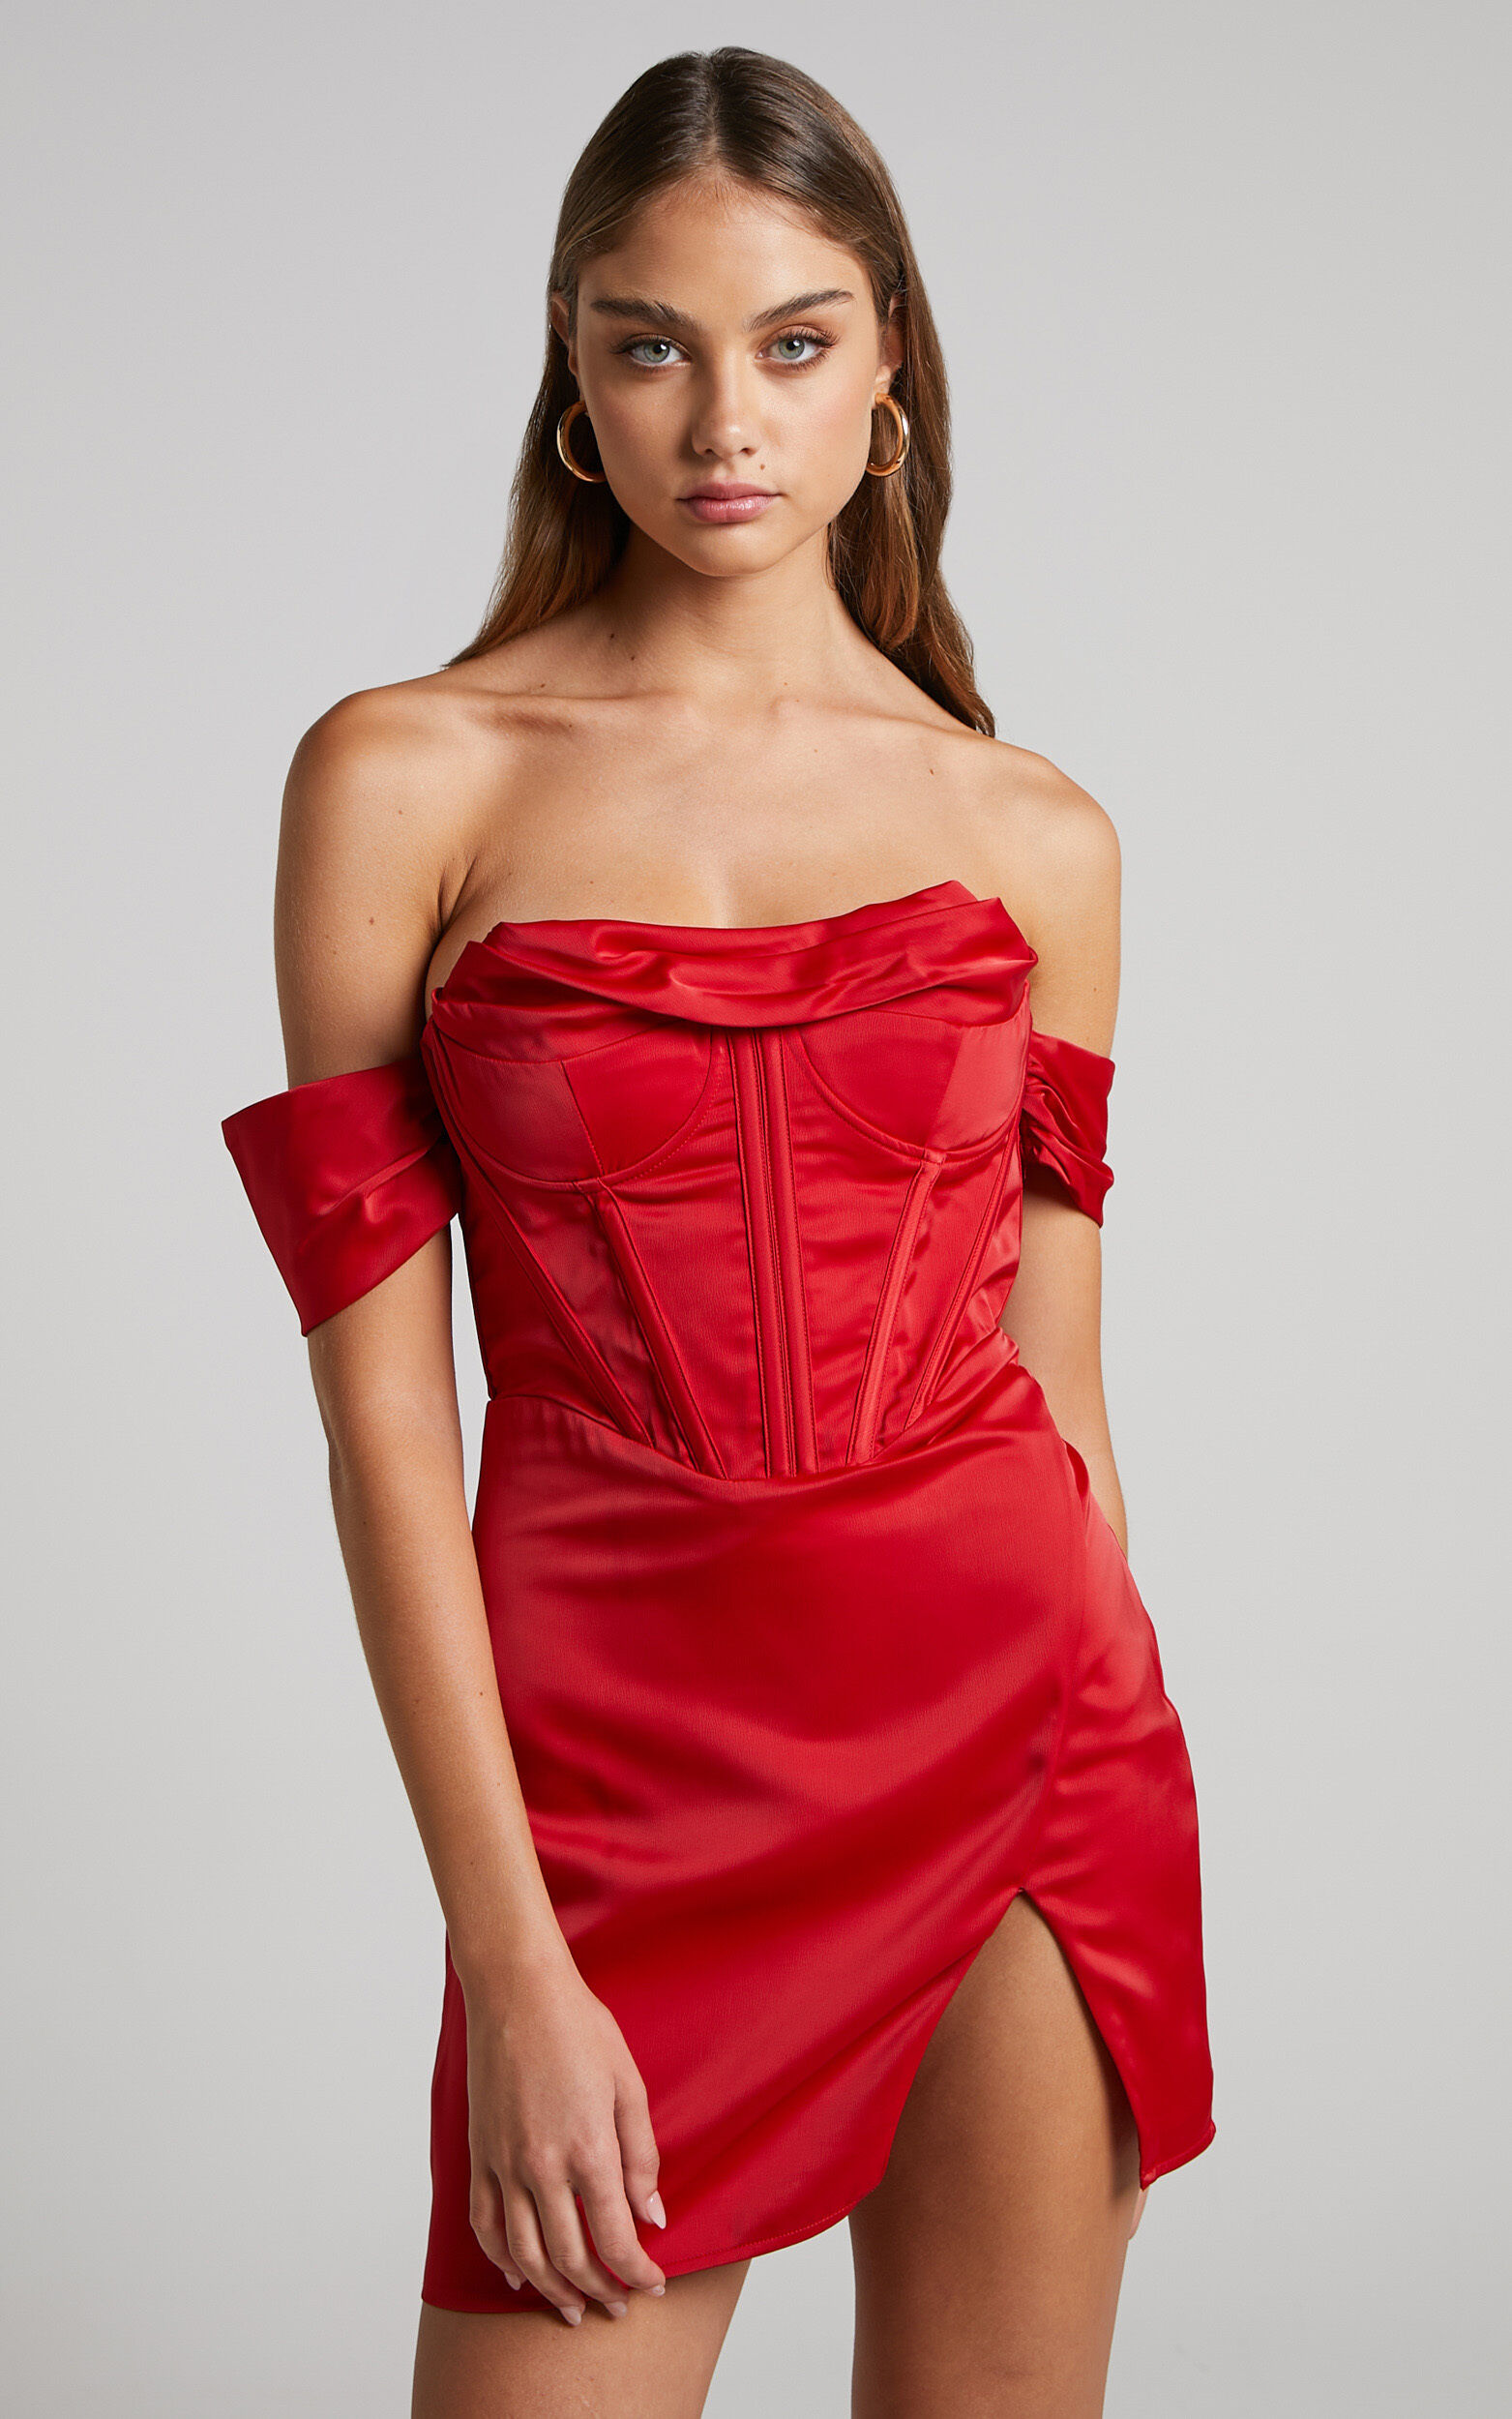 Wallace Mini Dress - Strapless Bardot Sleeve Cowl Neck Corset Dress in Red - 04, RED2